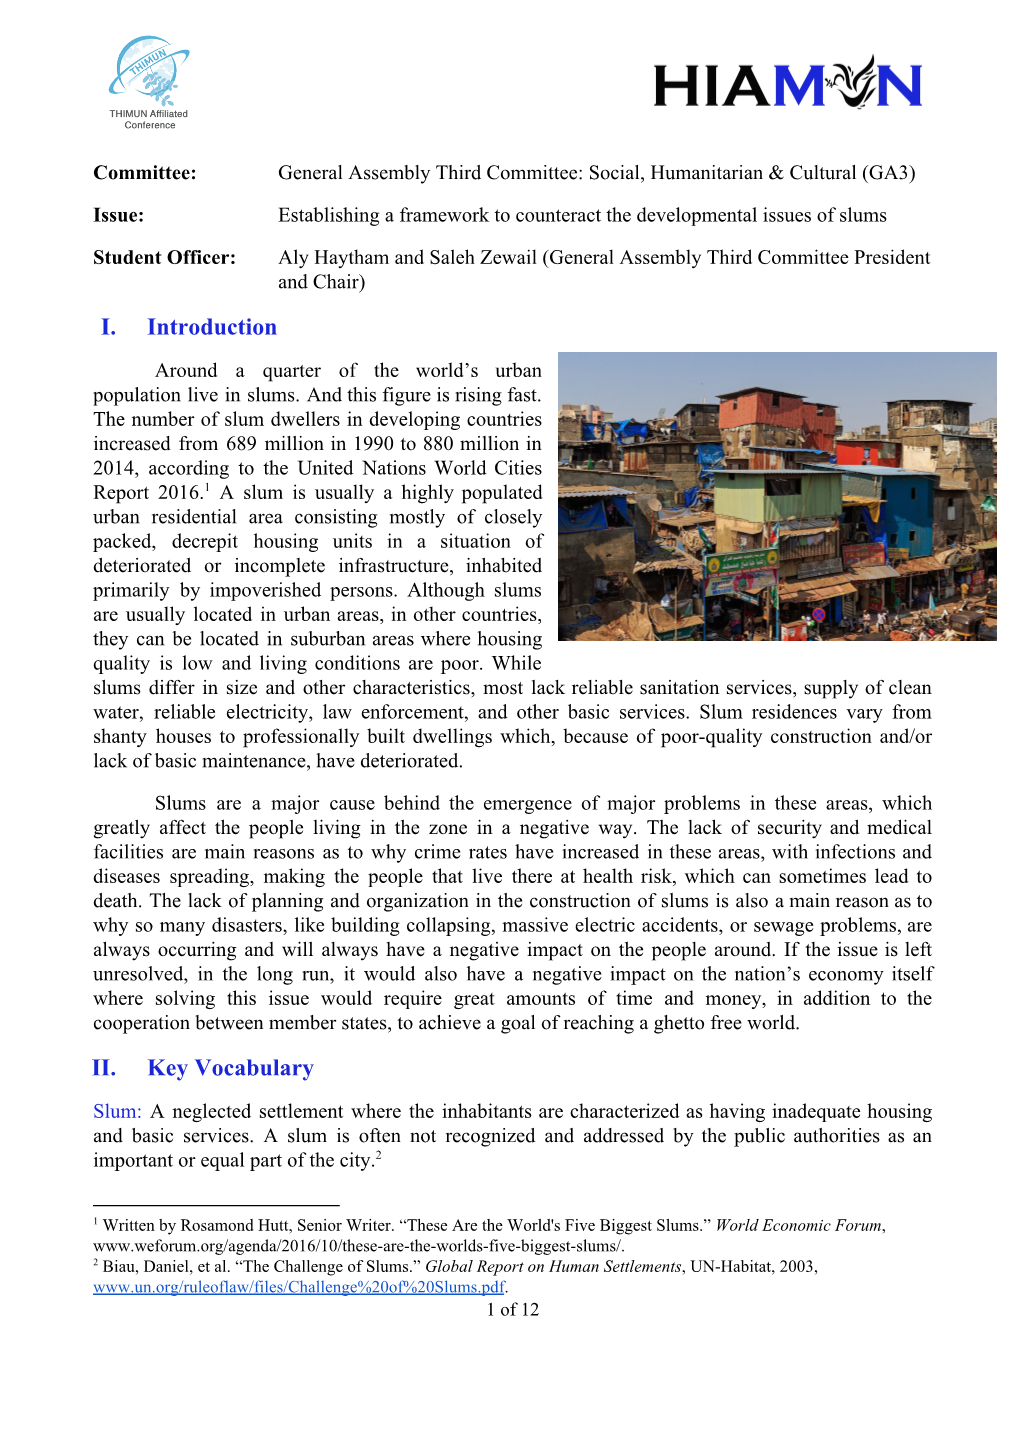 Establishing a Framework to Counteract the Developmental Issues of Slums